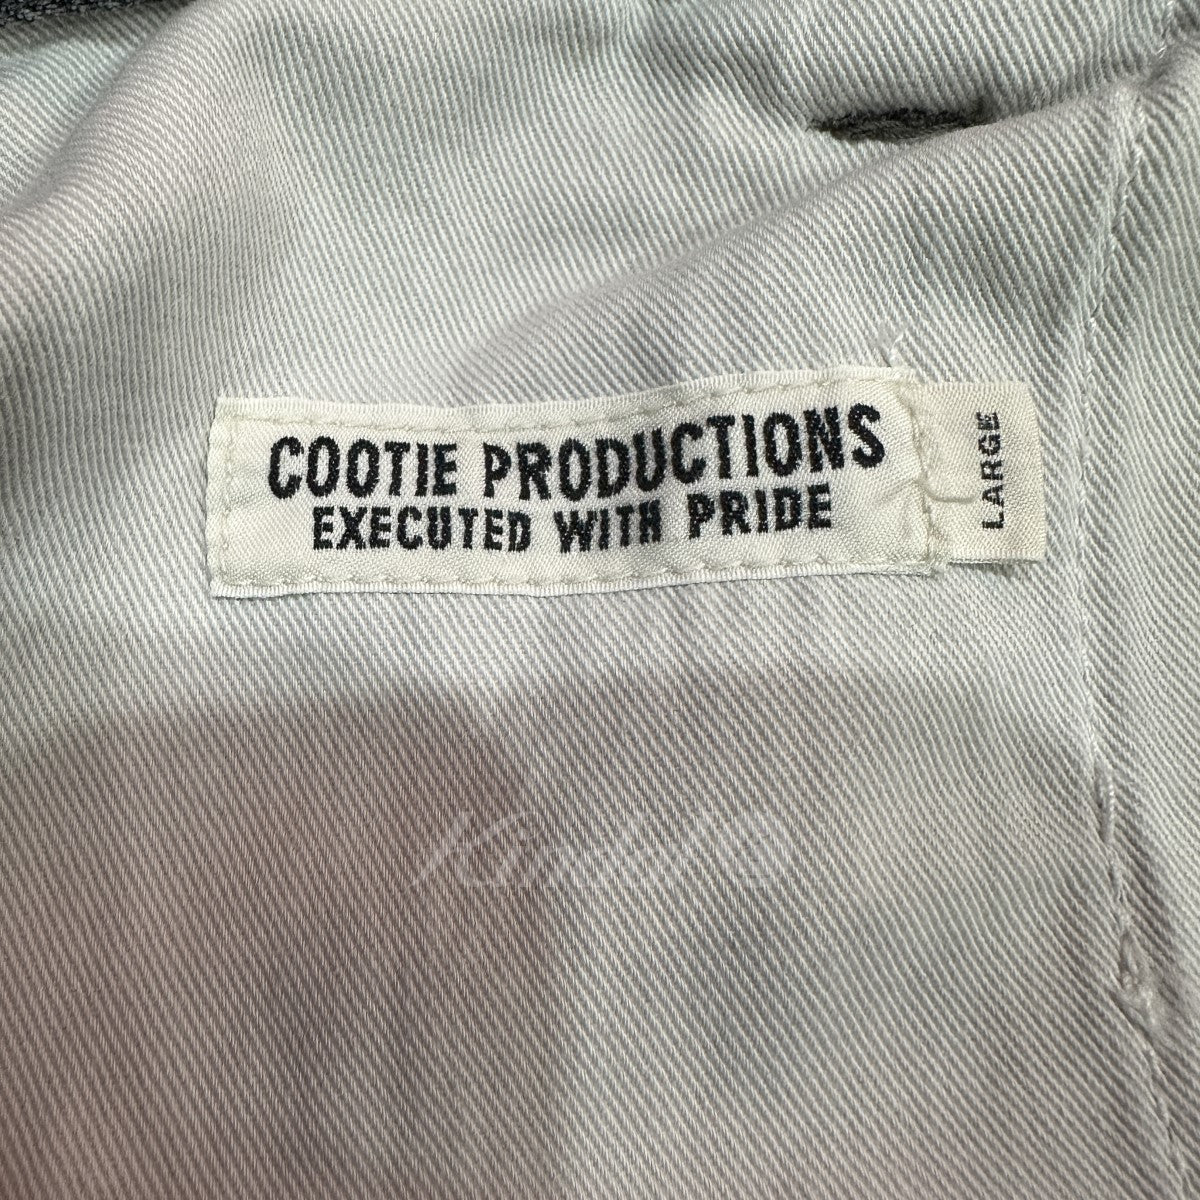 COOTIE PRODUCTIONS(クーティープロダクションズ) 24SS 5 Pocket Baggy 